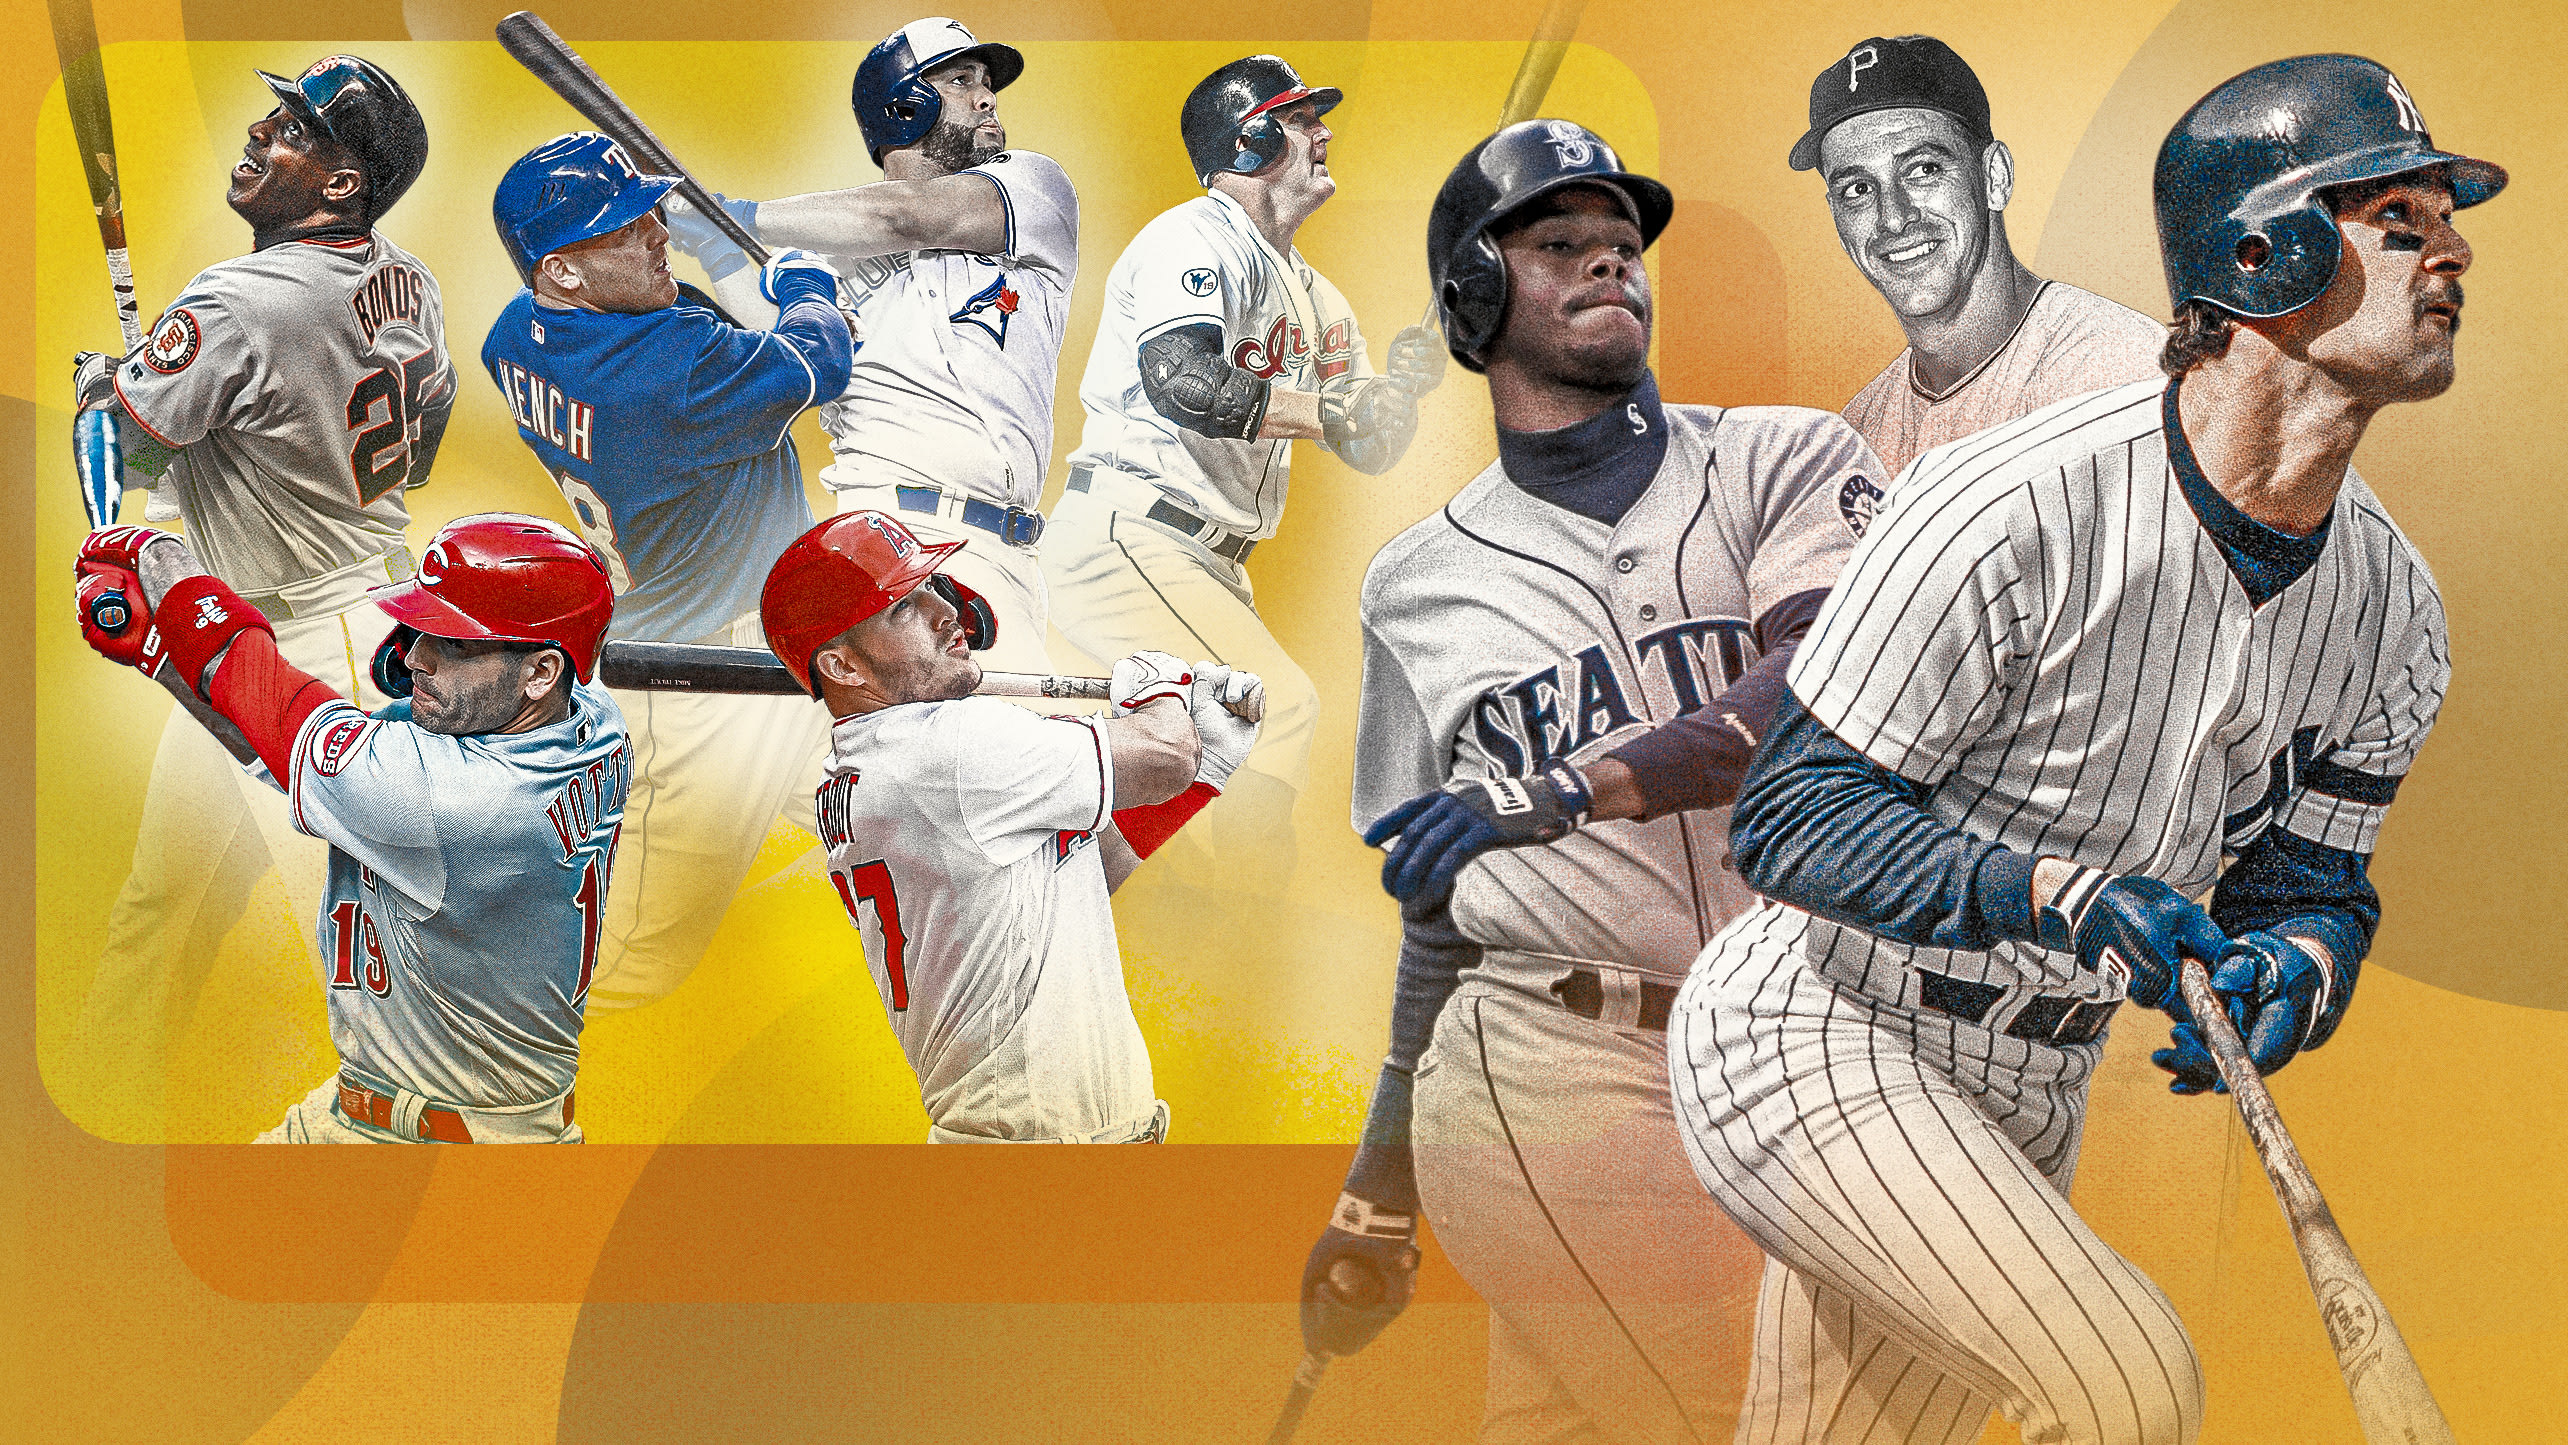 A montage of nine players who have had long home run streaks